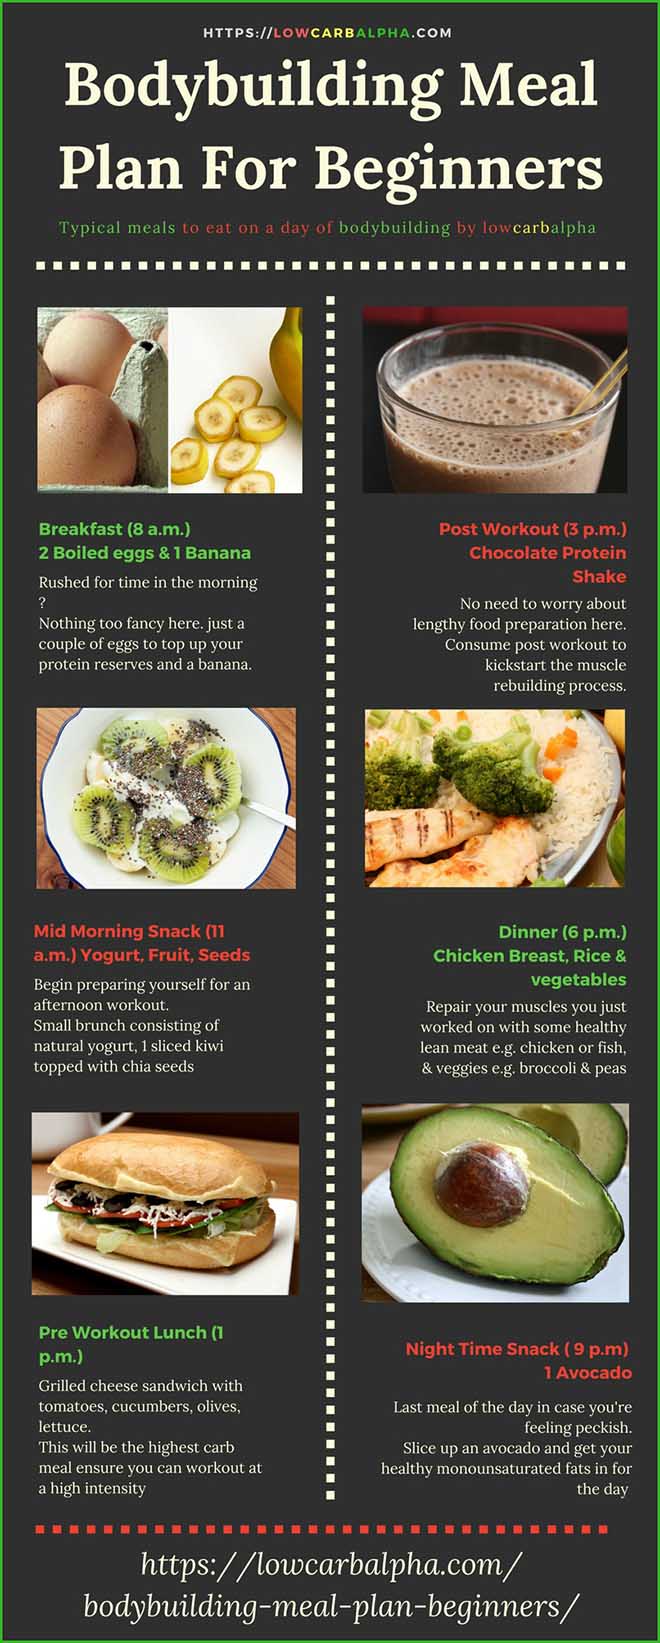 Bodybuilding Meal Plan For Beginners Typical meals to eat on a day of bodybuilding #health #nutrition #loseweight #lowcarbalpha